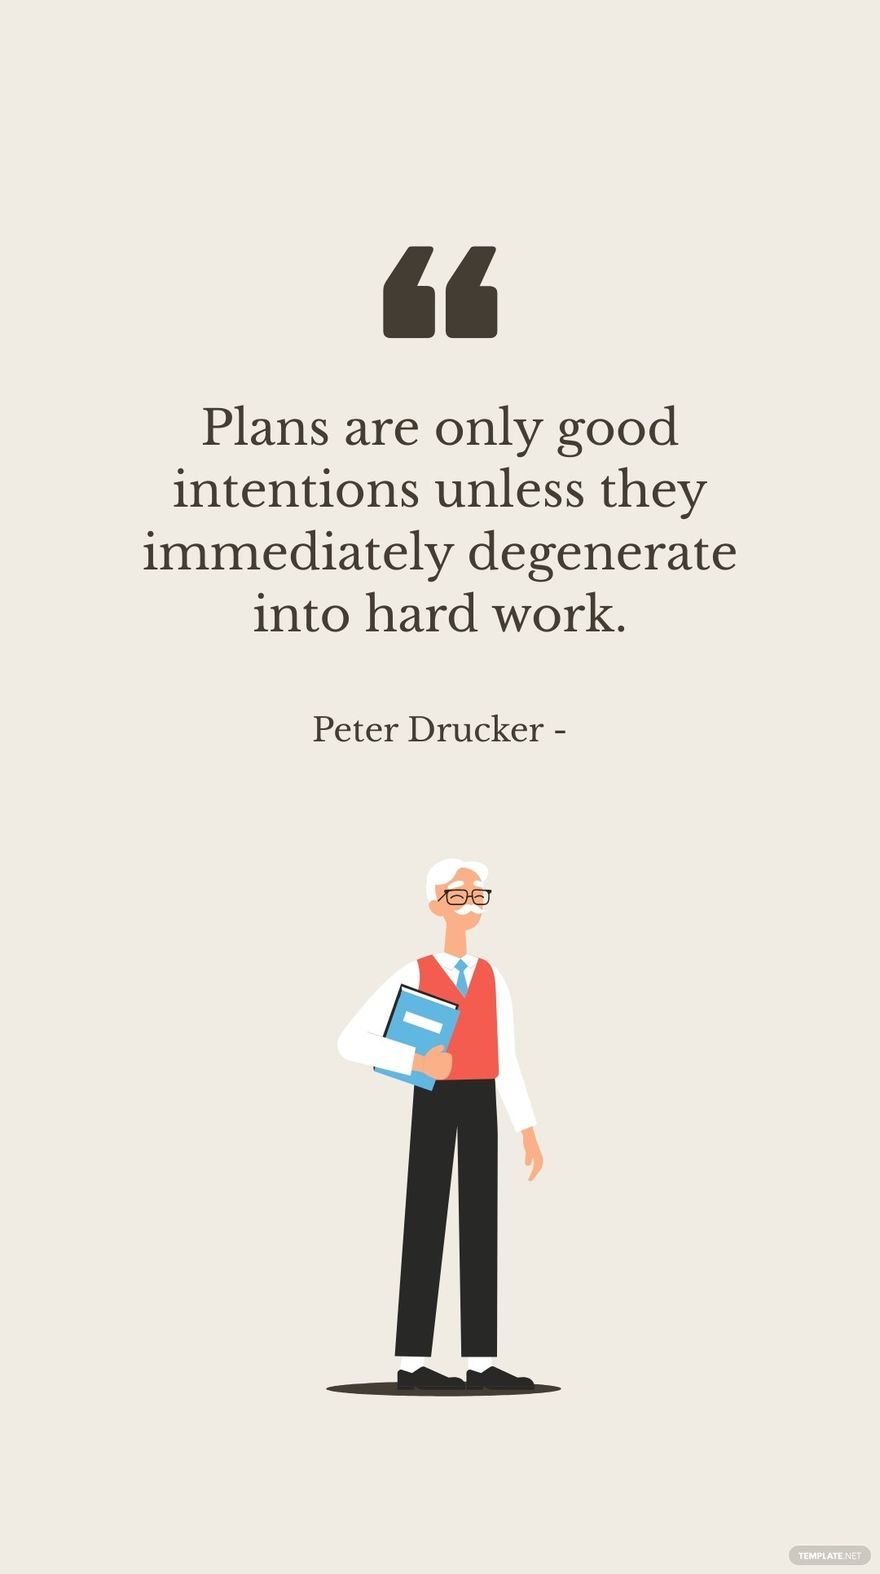 Peter Drucker - Plans are only good intentions unless they immediately degenerate into hard work. in JPG